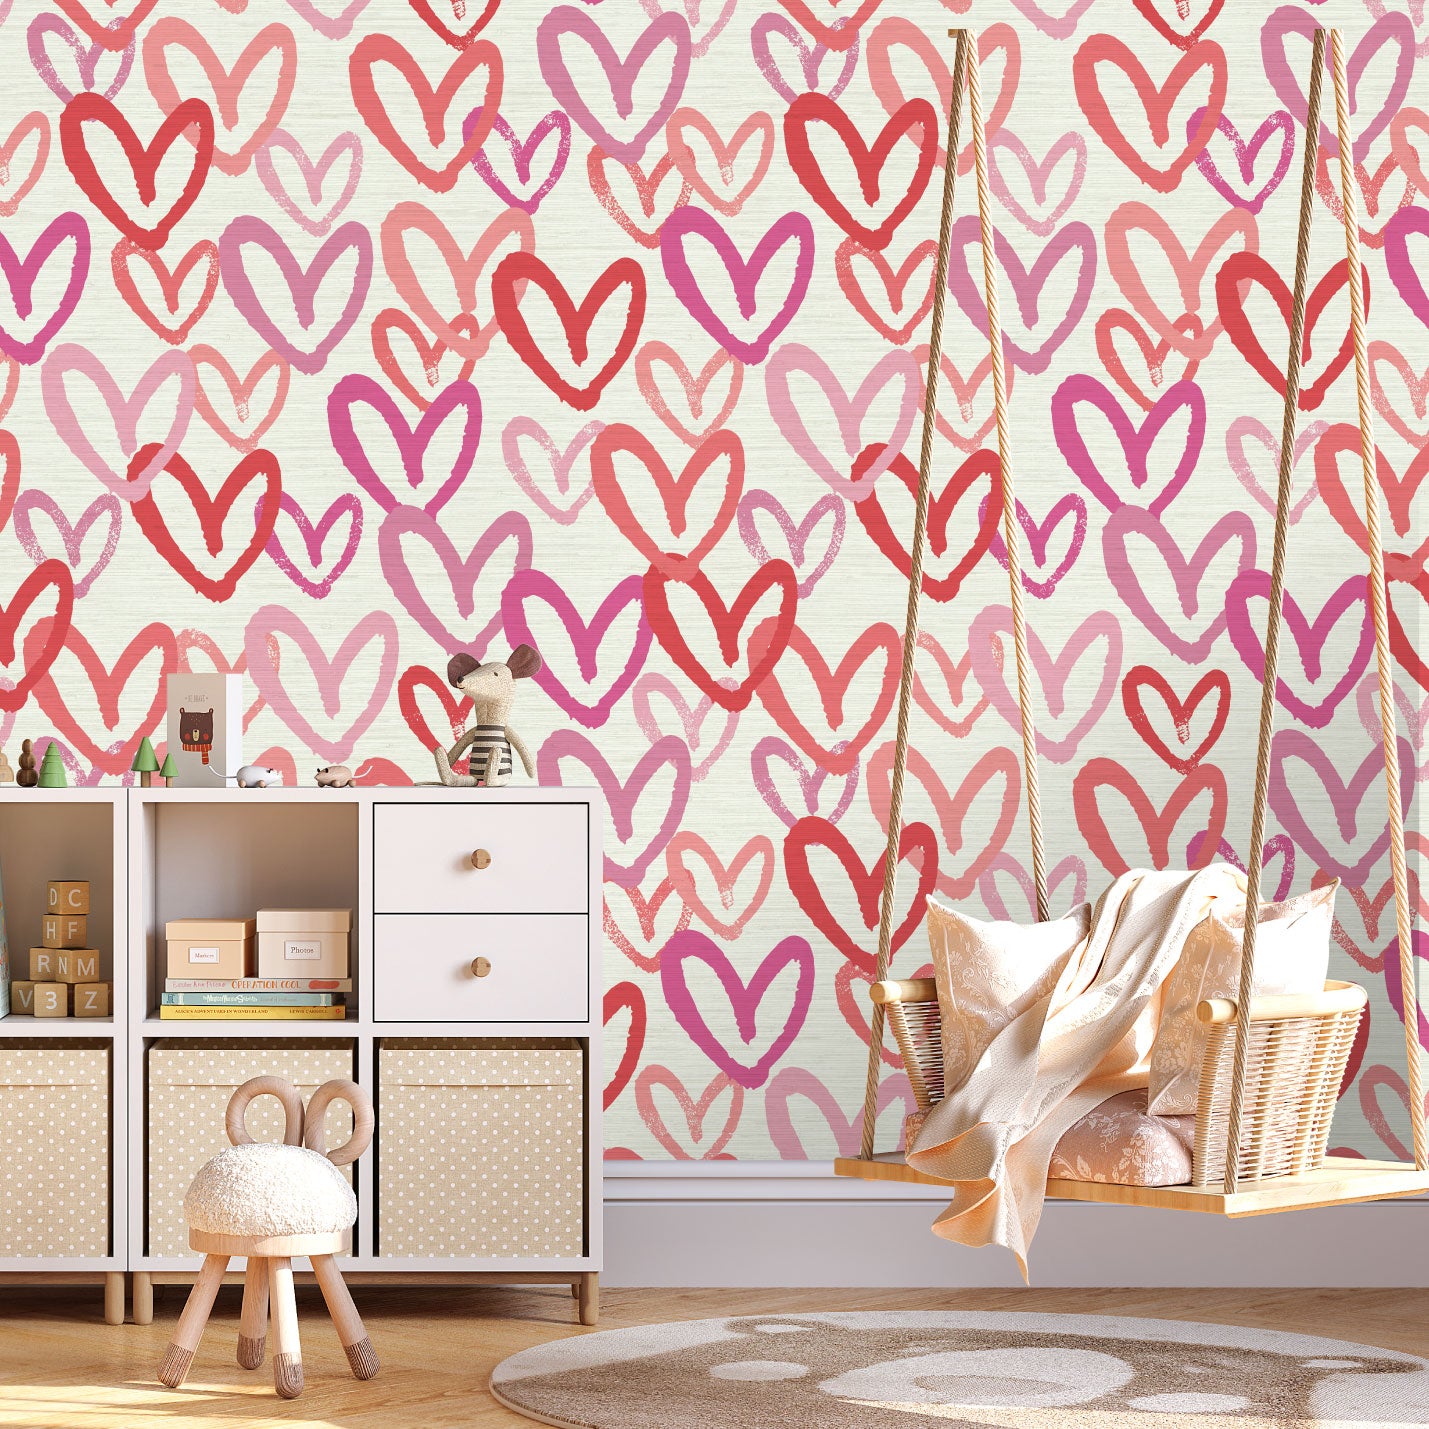 Printed grasscloth wallpaper in allover oversized layered heart print great for kids bedrooms and playroom for a fun and happy wallpaper print design and decor Natural Textured Eco-Friendly Non-toxic High-quality Sustainable Interior Design Bold Custom Tailor-made Retro chic House of Shan Imperfect heart white rpink hot pink red nursery bedroom girl